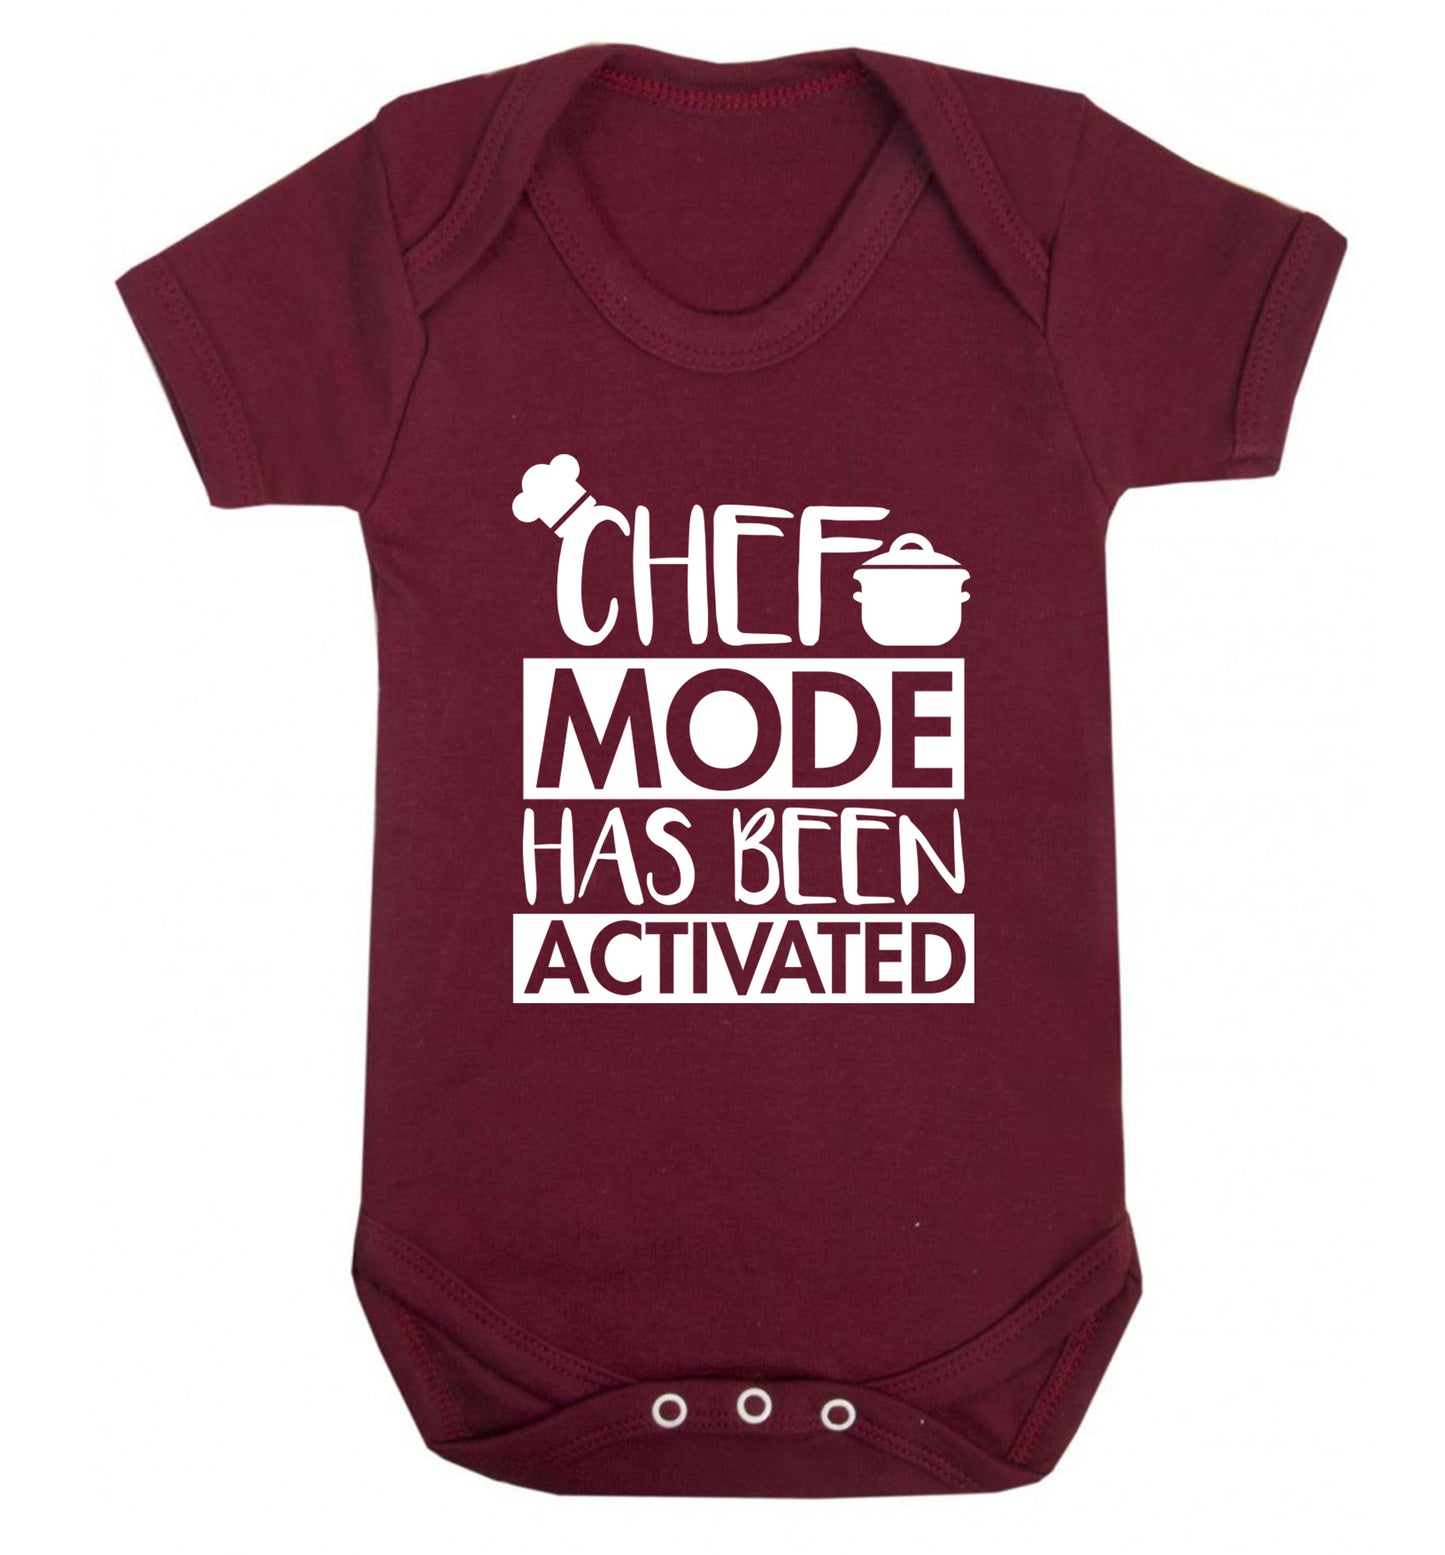 Chef mode has been activated Baby Vest maroon 18-24 months